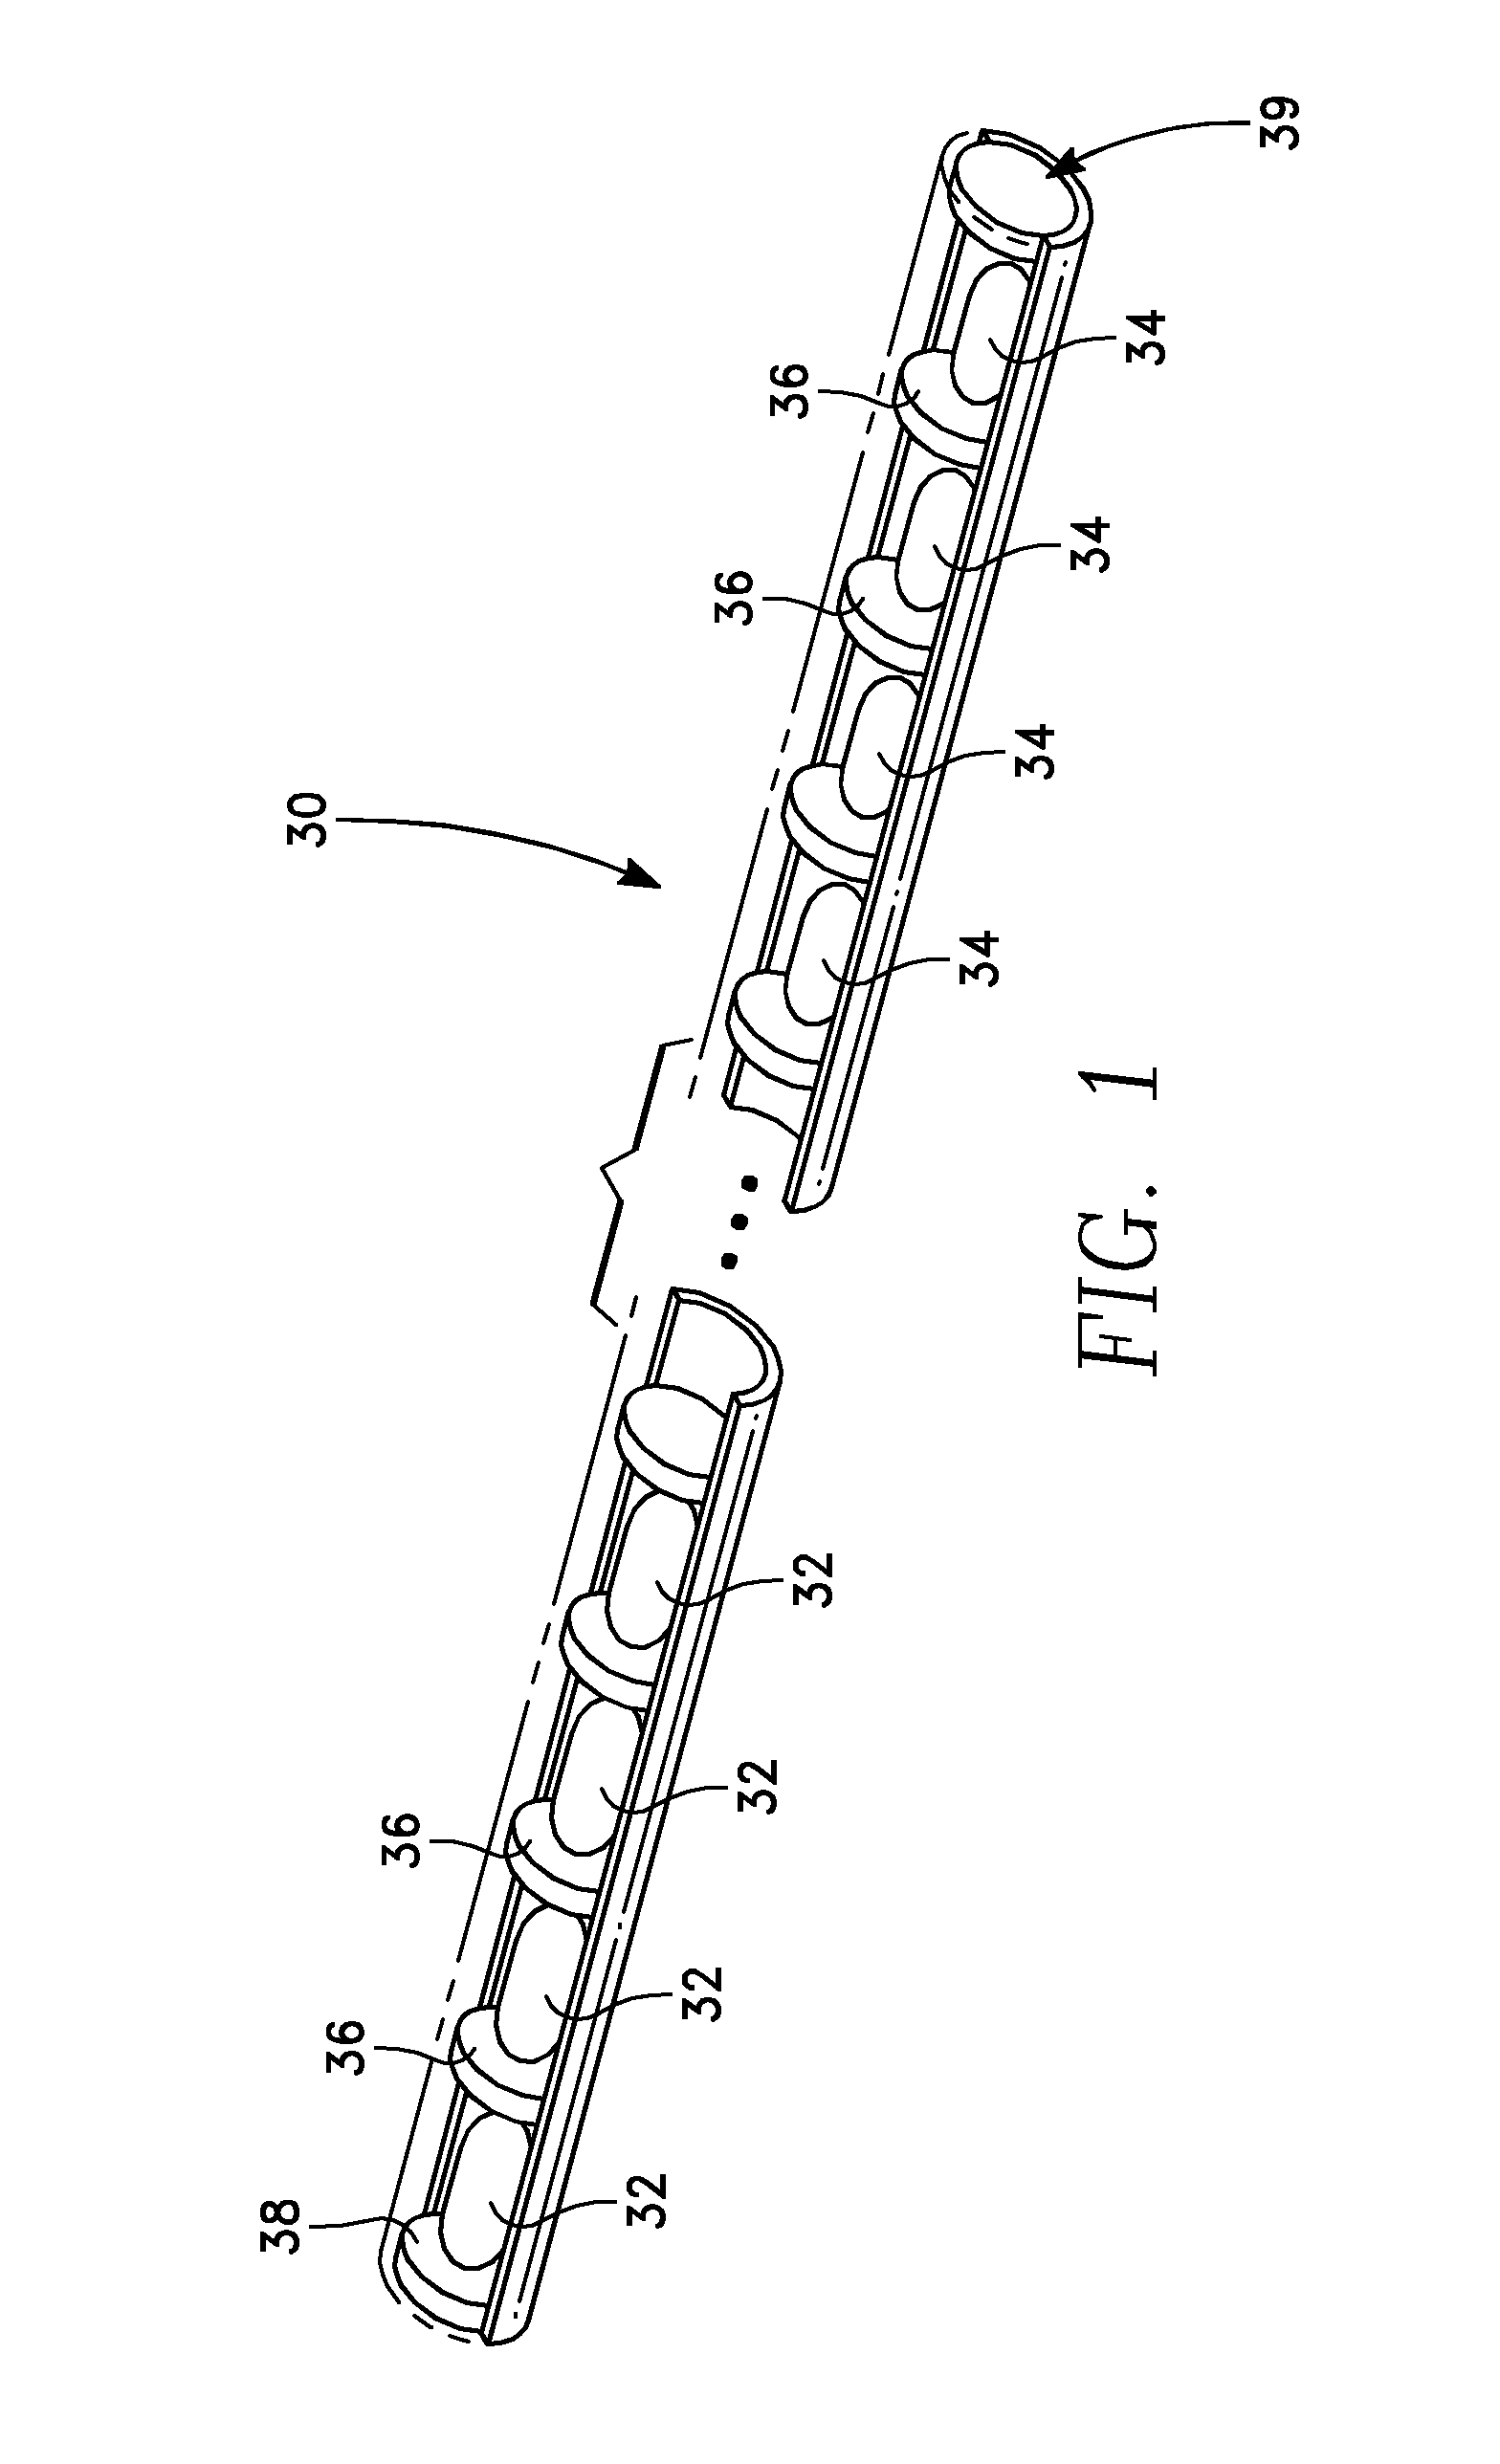 Method and apparatus for improving the utilization of solitary bees for pollination of crops